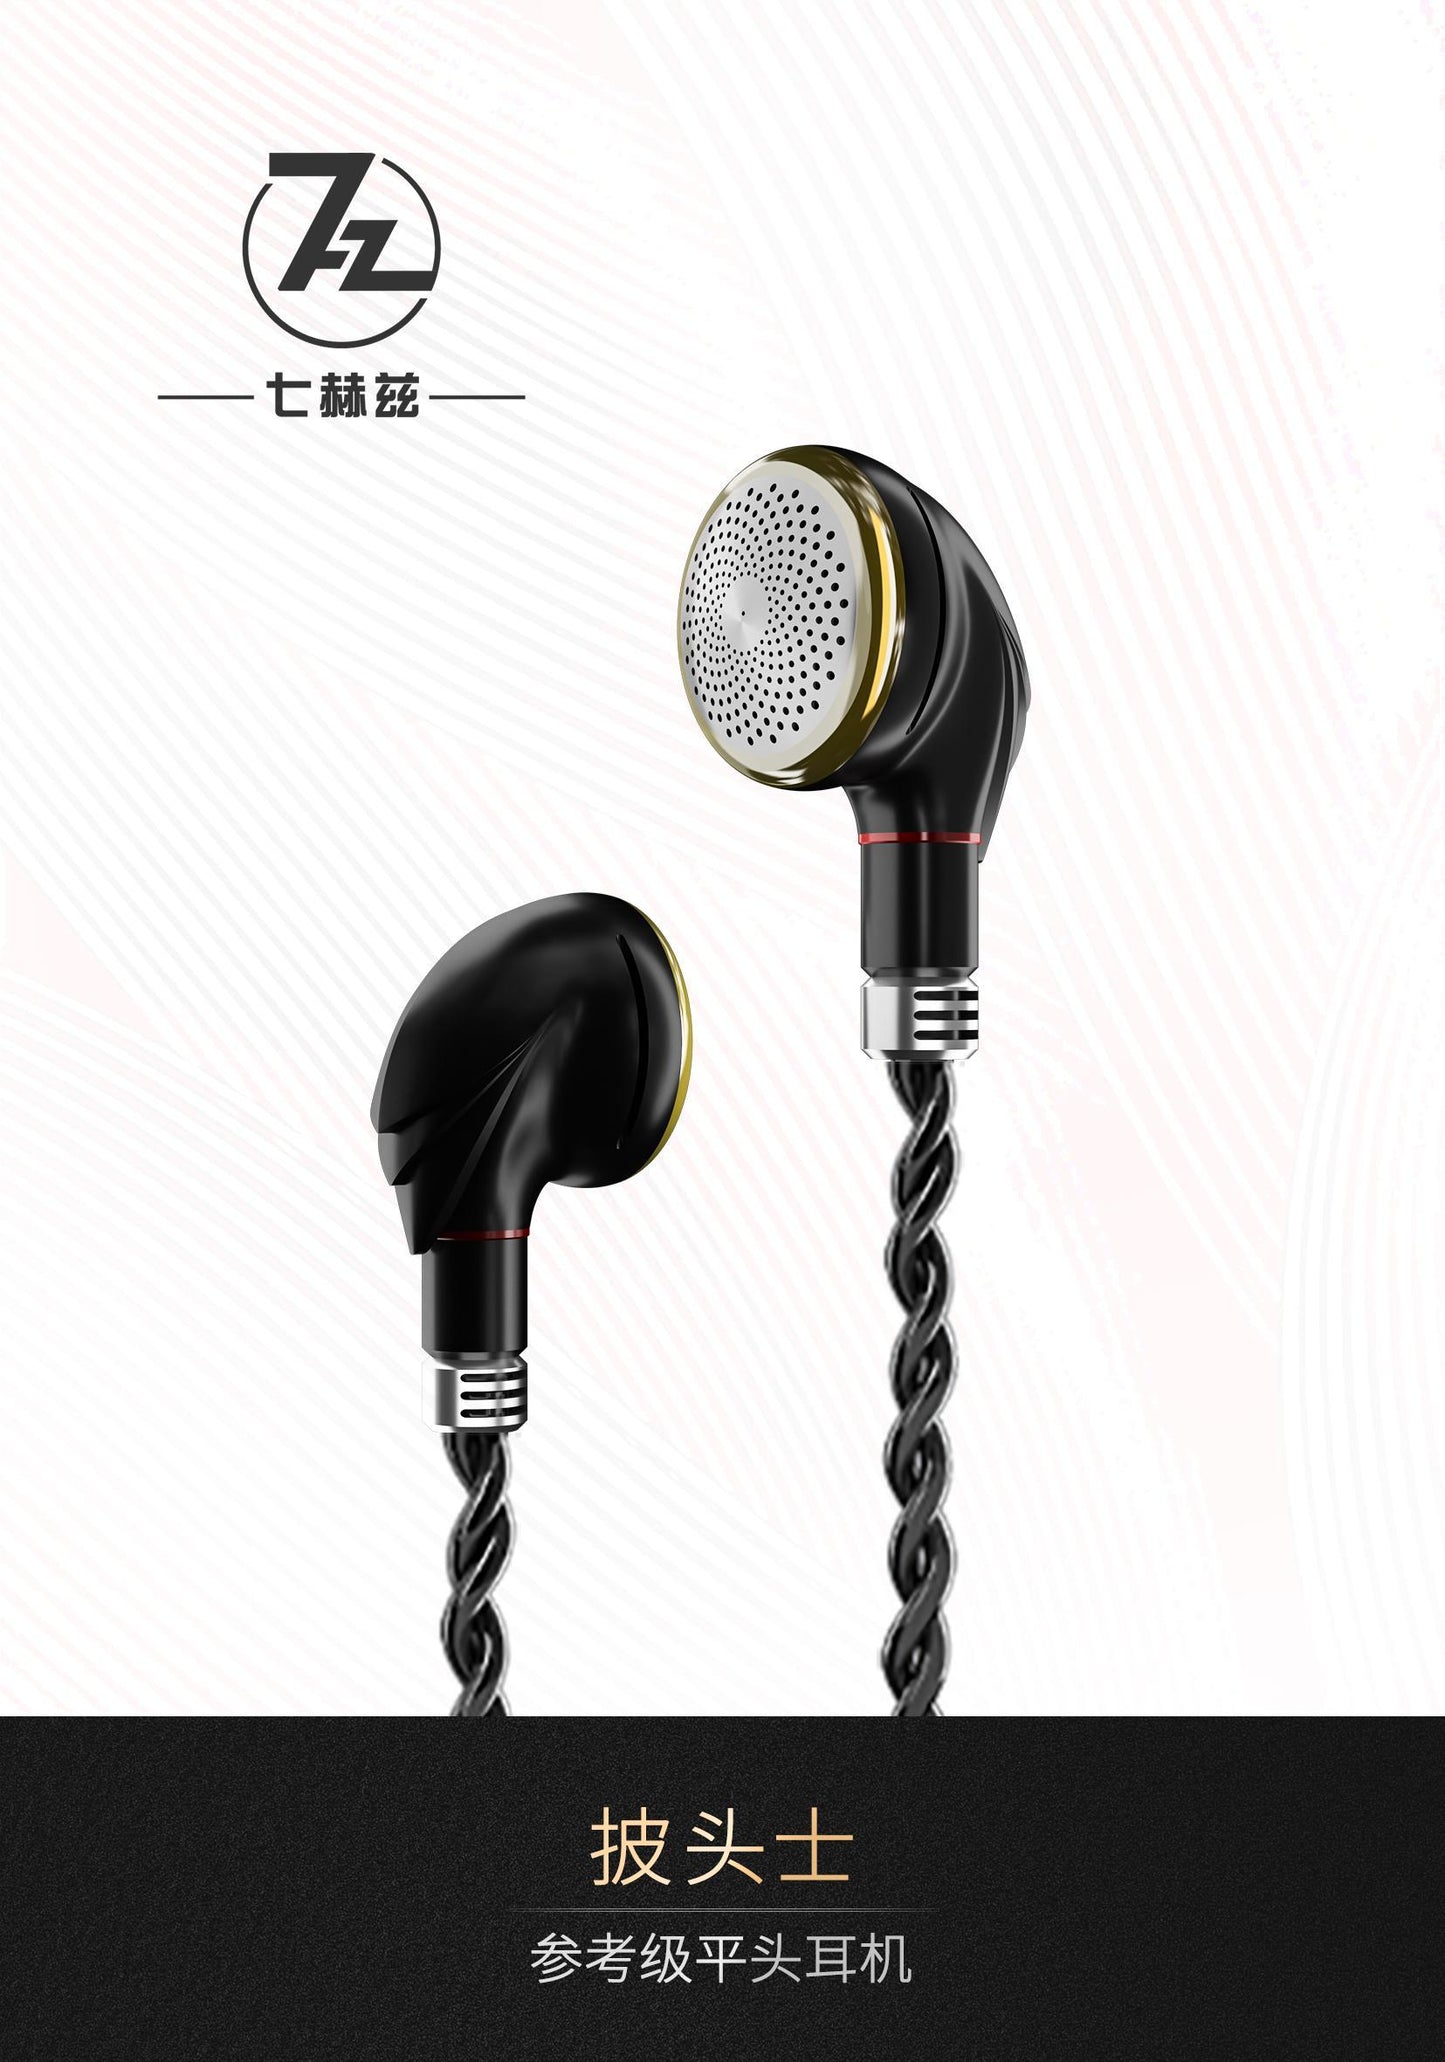 7HZ P-TWOS Earphone Composite Nano ZnO Crystal Diaphragm Headset with Efficiency External Magnetic Moving Coil Flat Head Earbuds - The HiFi Cat